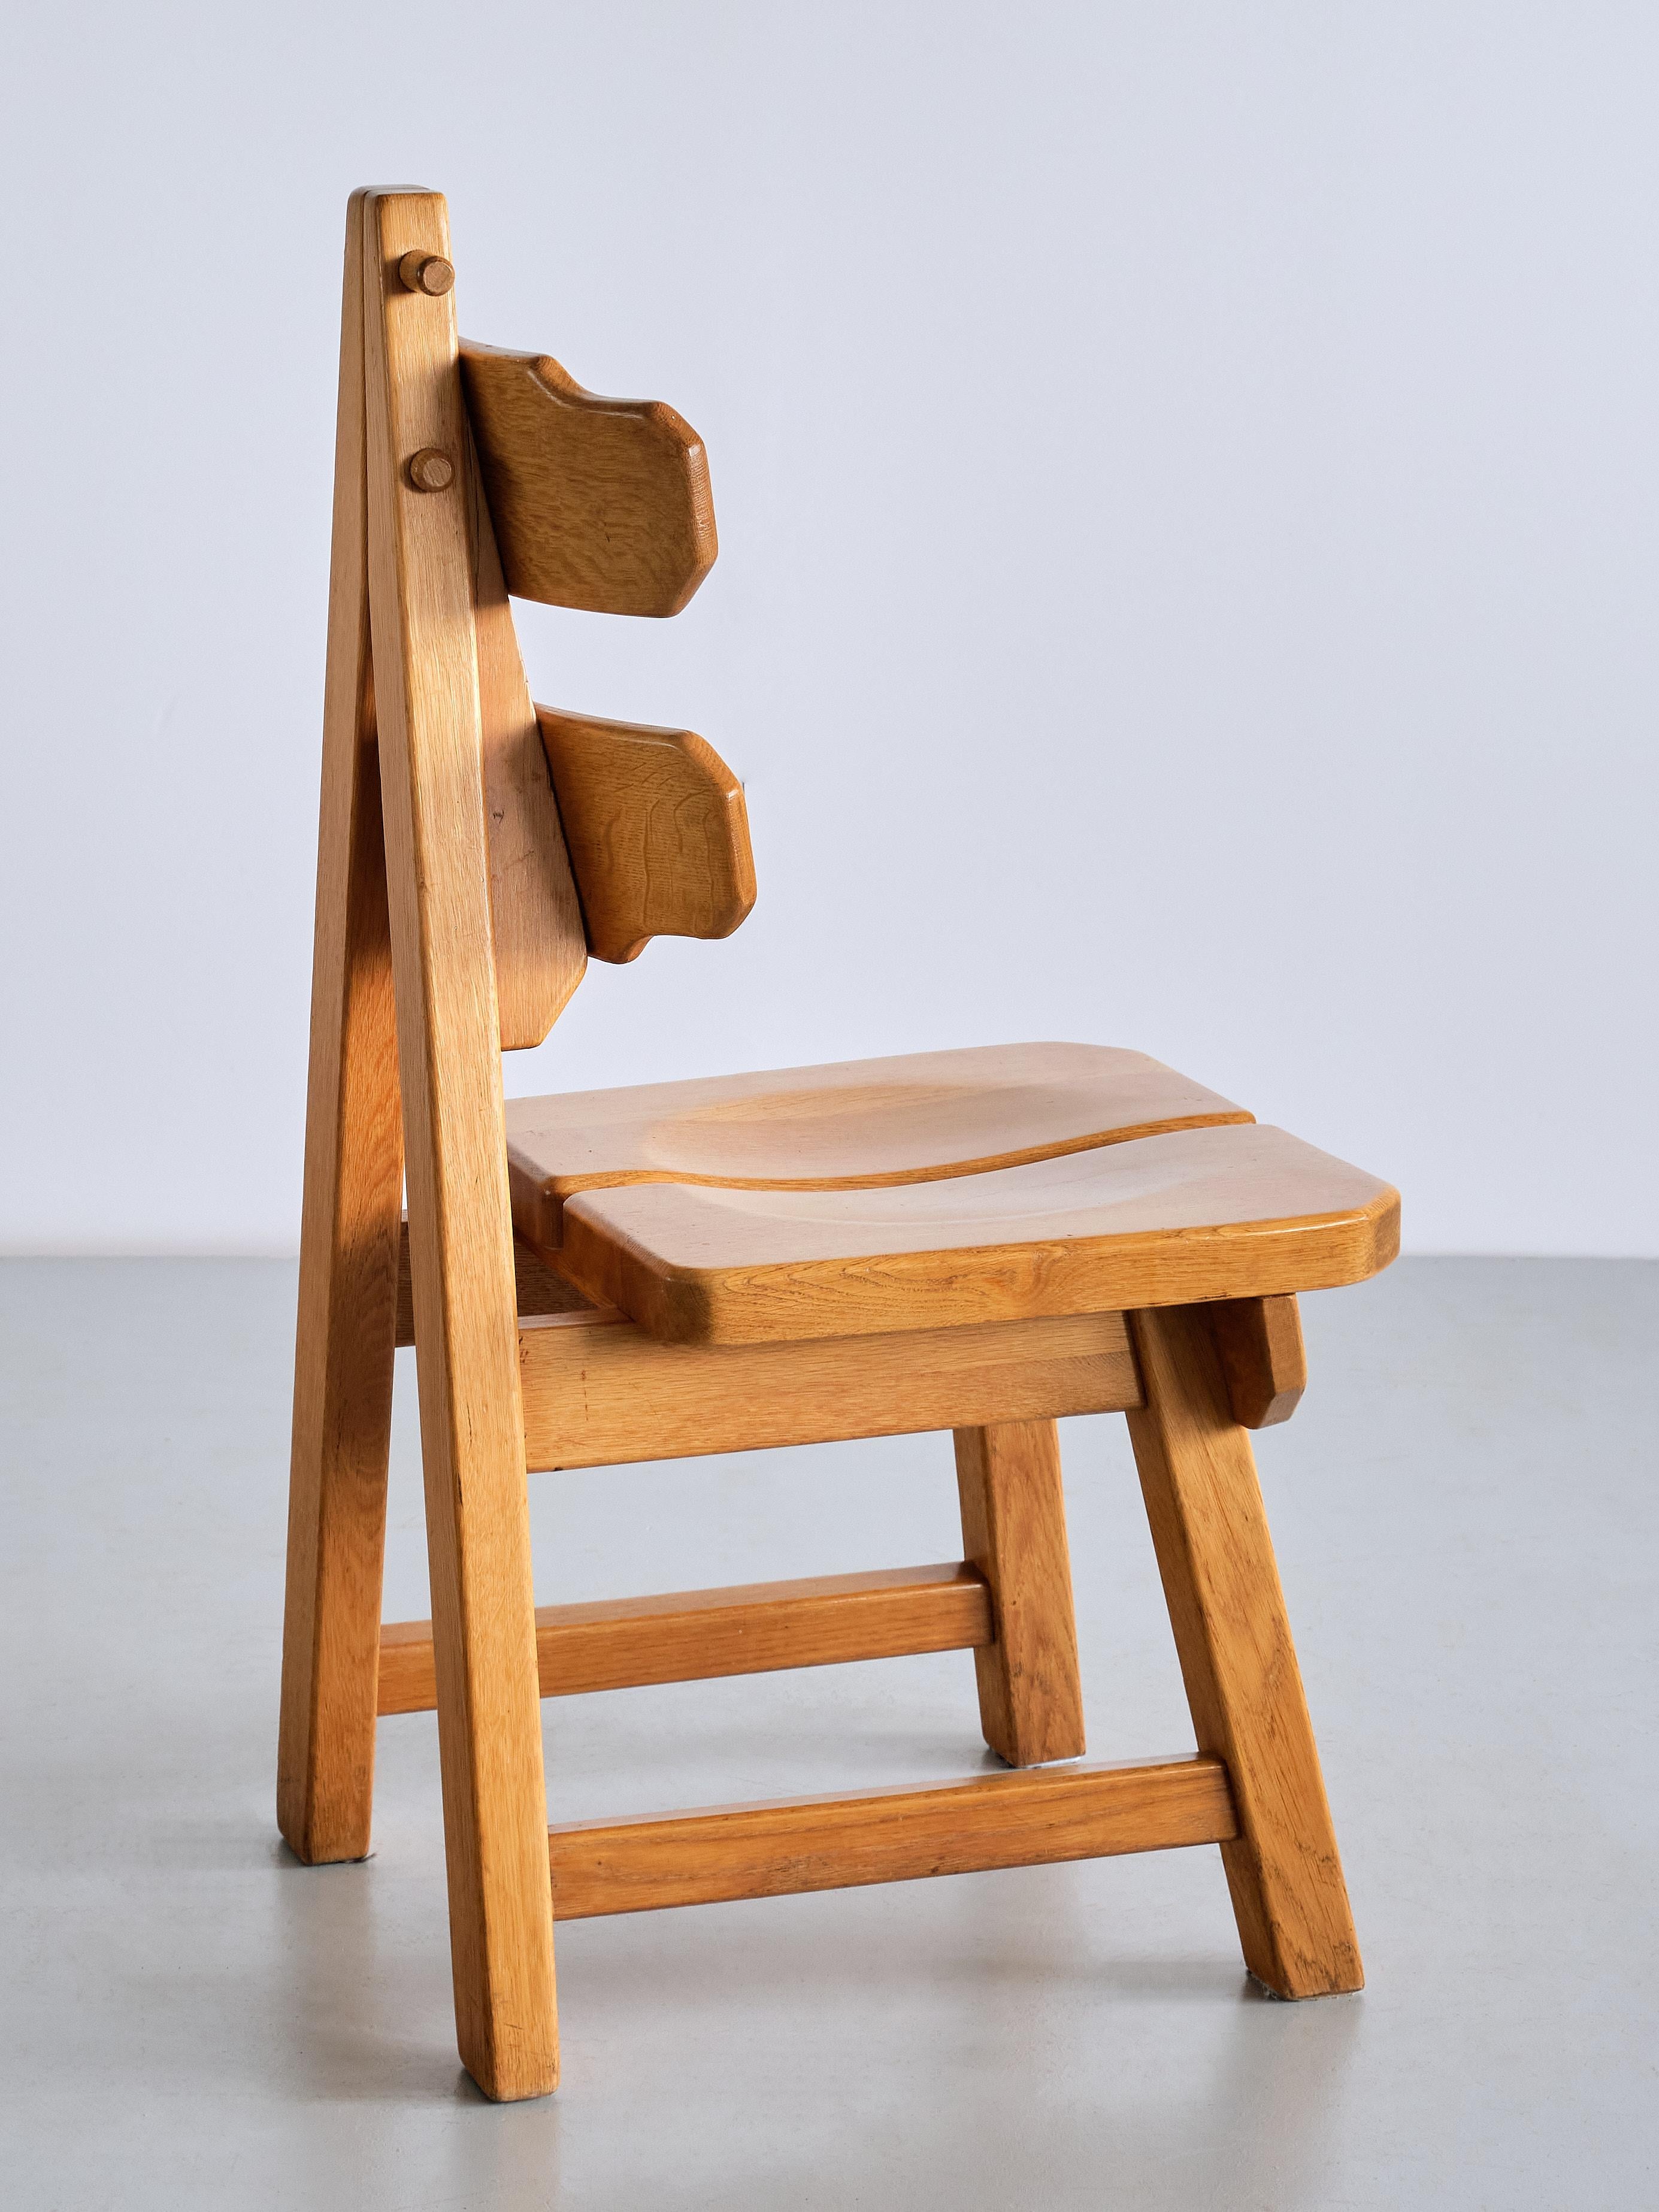 Sculptural Set of Six Brutalist Dining Chairs in Solid Oak, France, 1960s For Sale 7